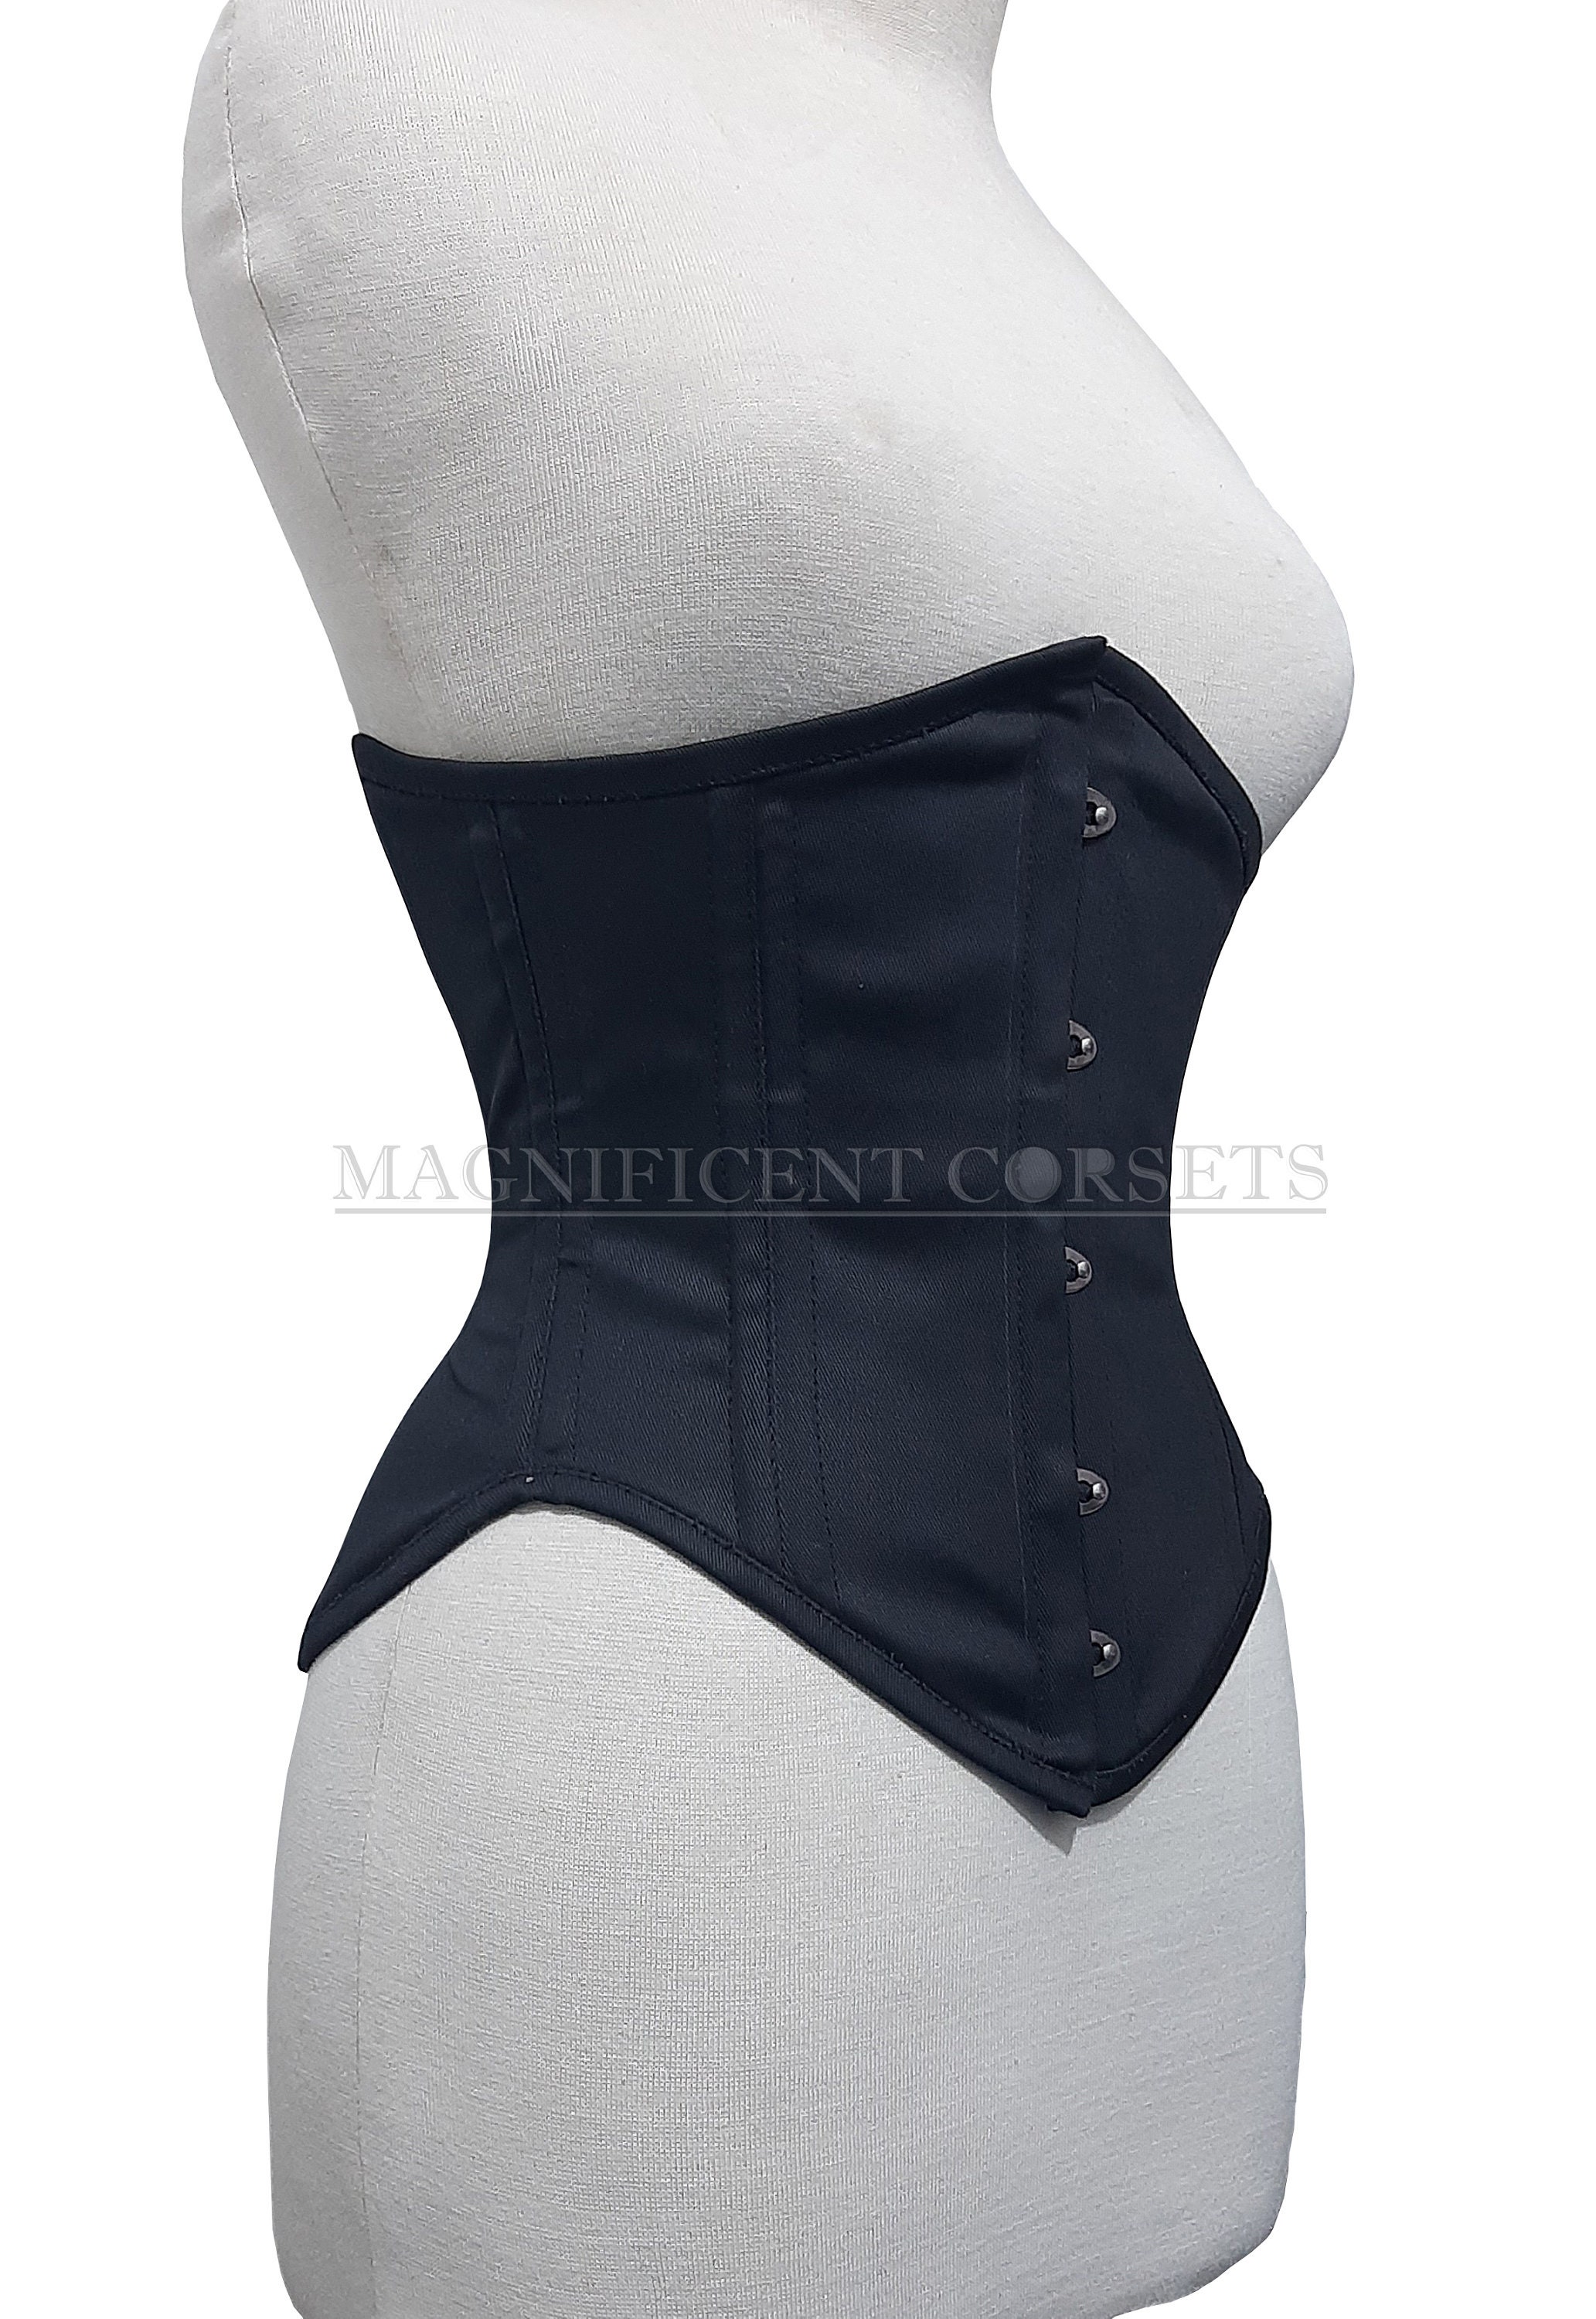 Small Bust Corset -  Canada